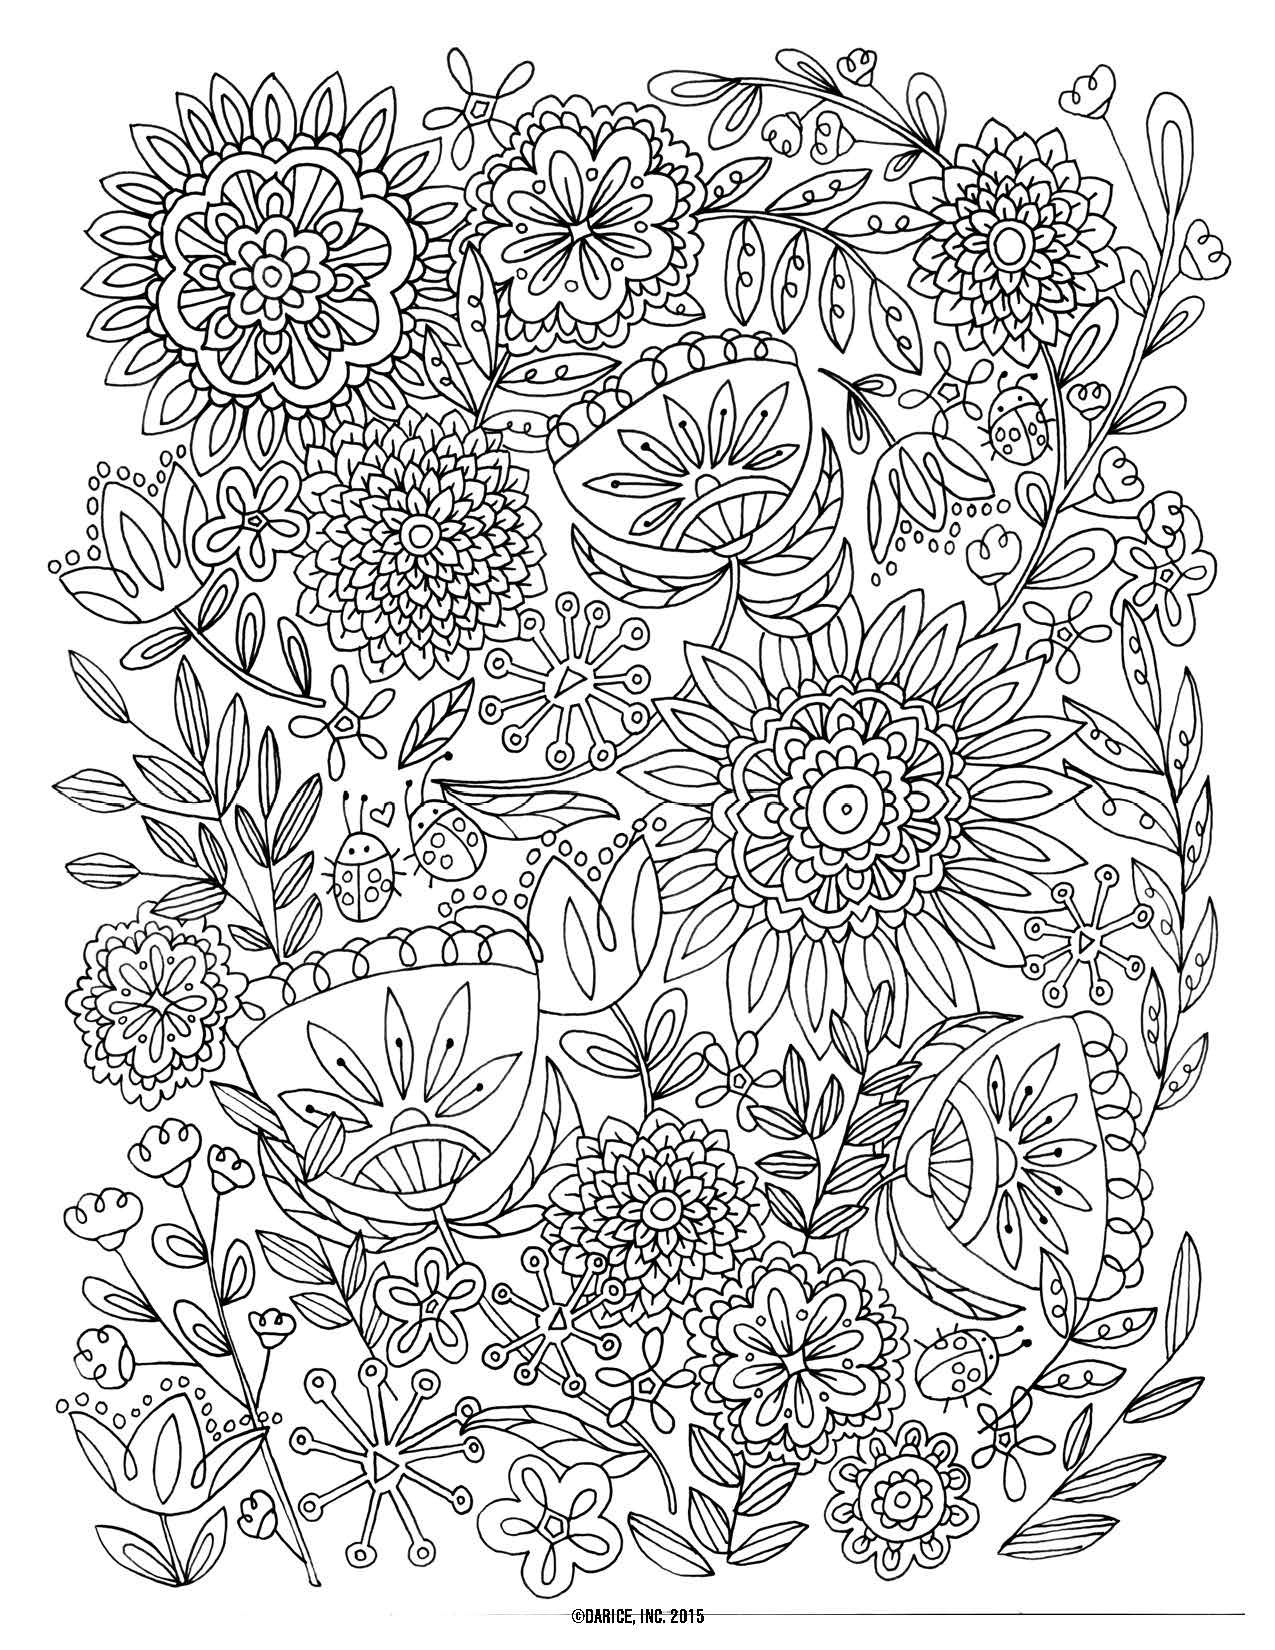 Free Coloring Pages Printables | Coloring Books Printable - Free Printable Flower Coloring Pages For Adults